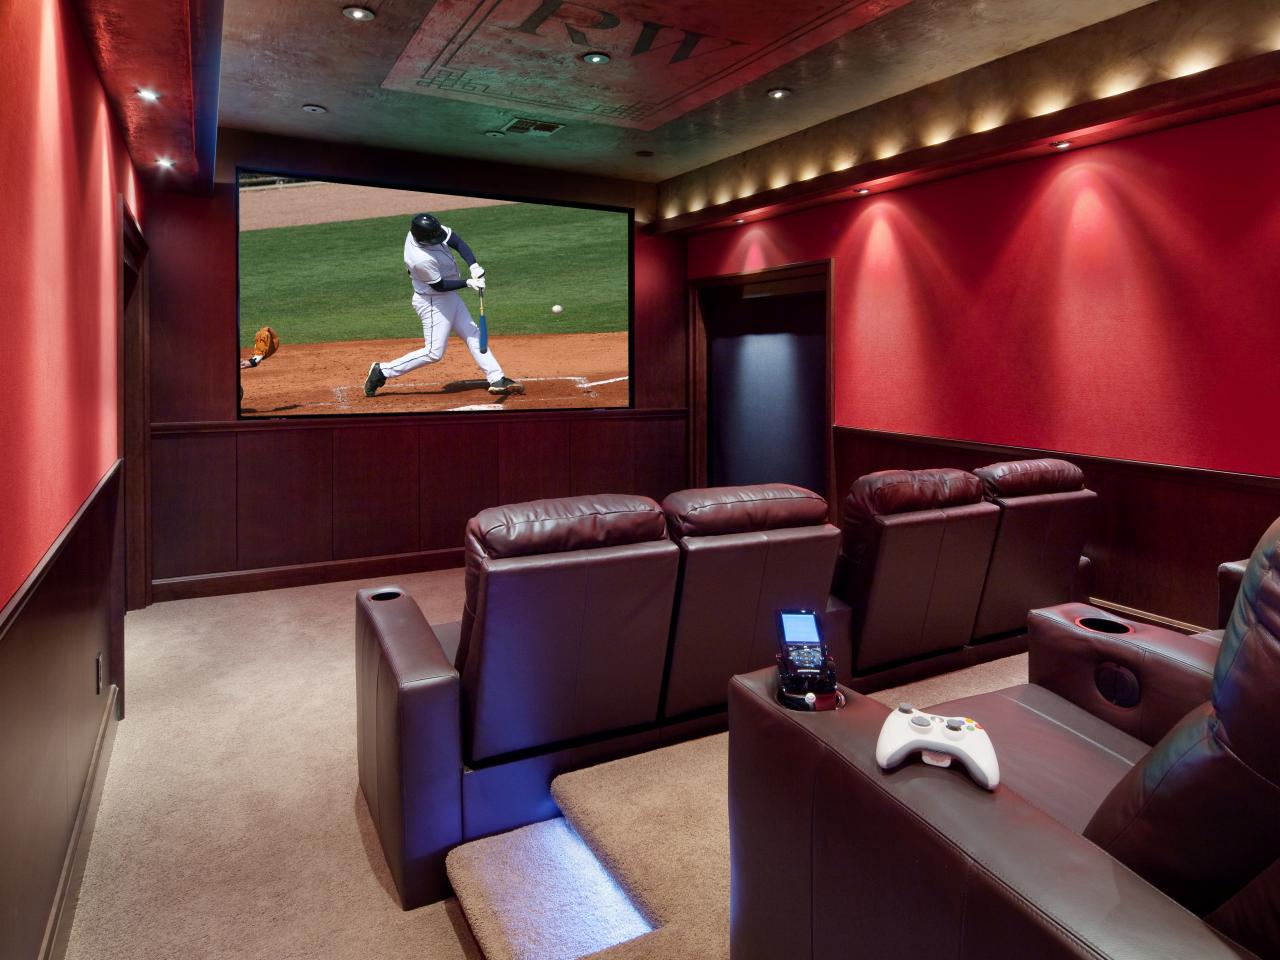 Media Room Snack Bar Theater Room Snack Bar Home Ideas Sam You within Small Home Theater Room Design Ideas